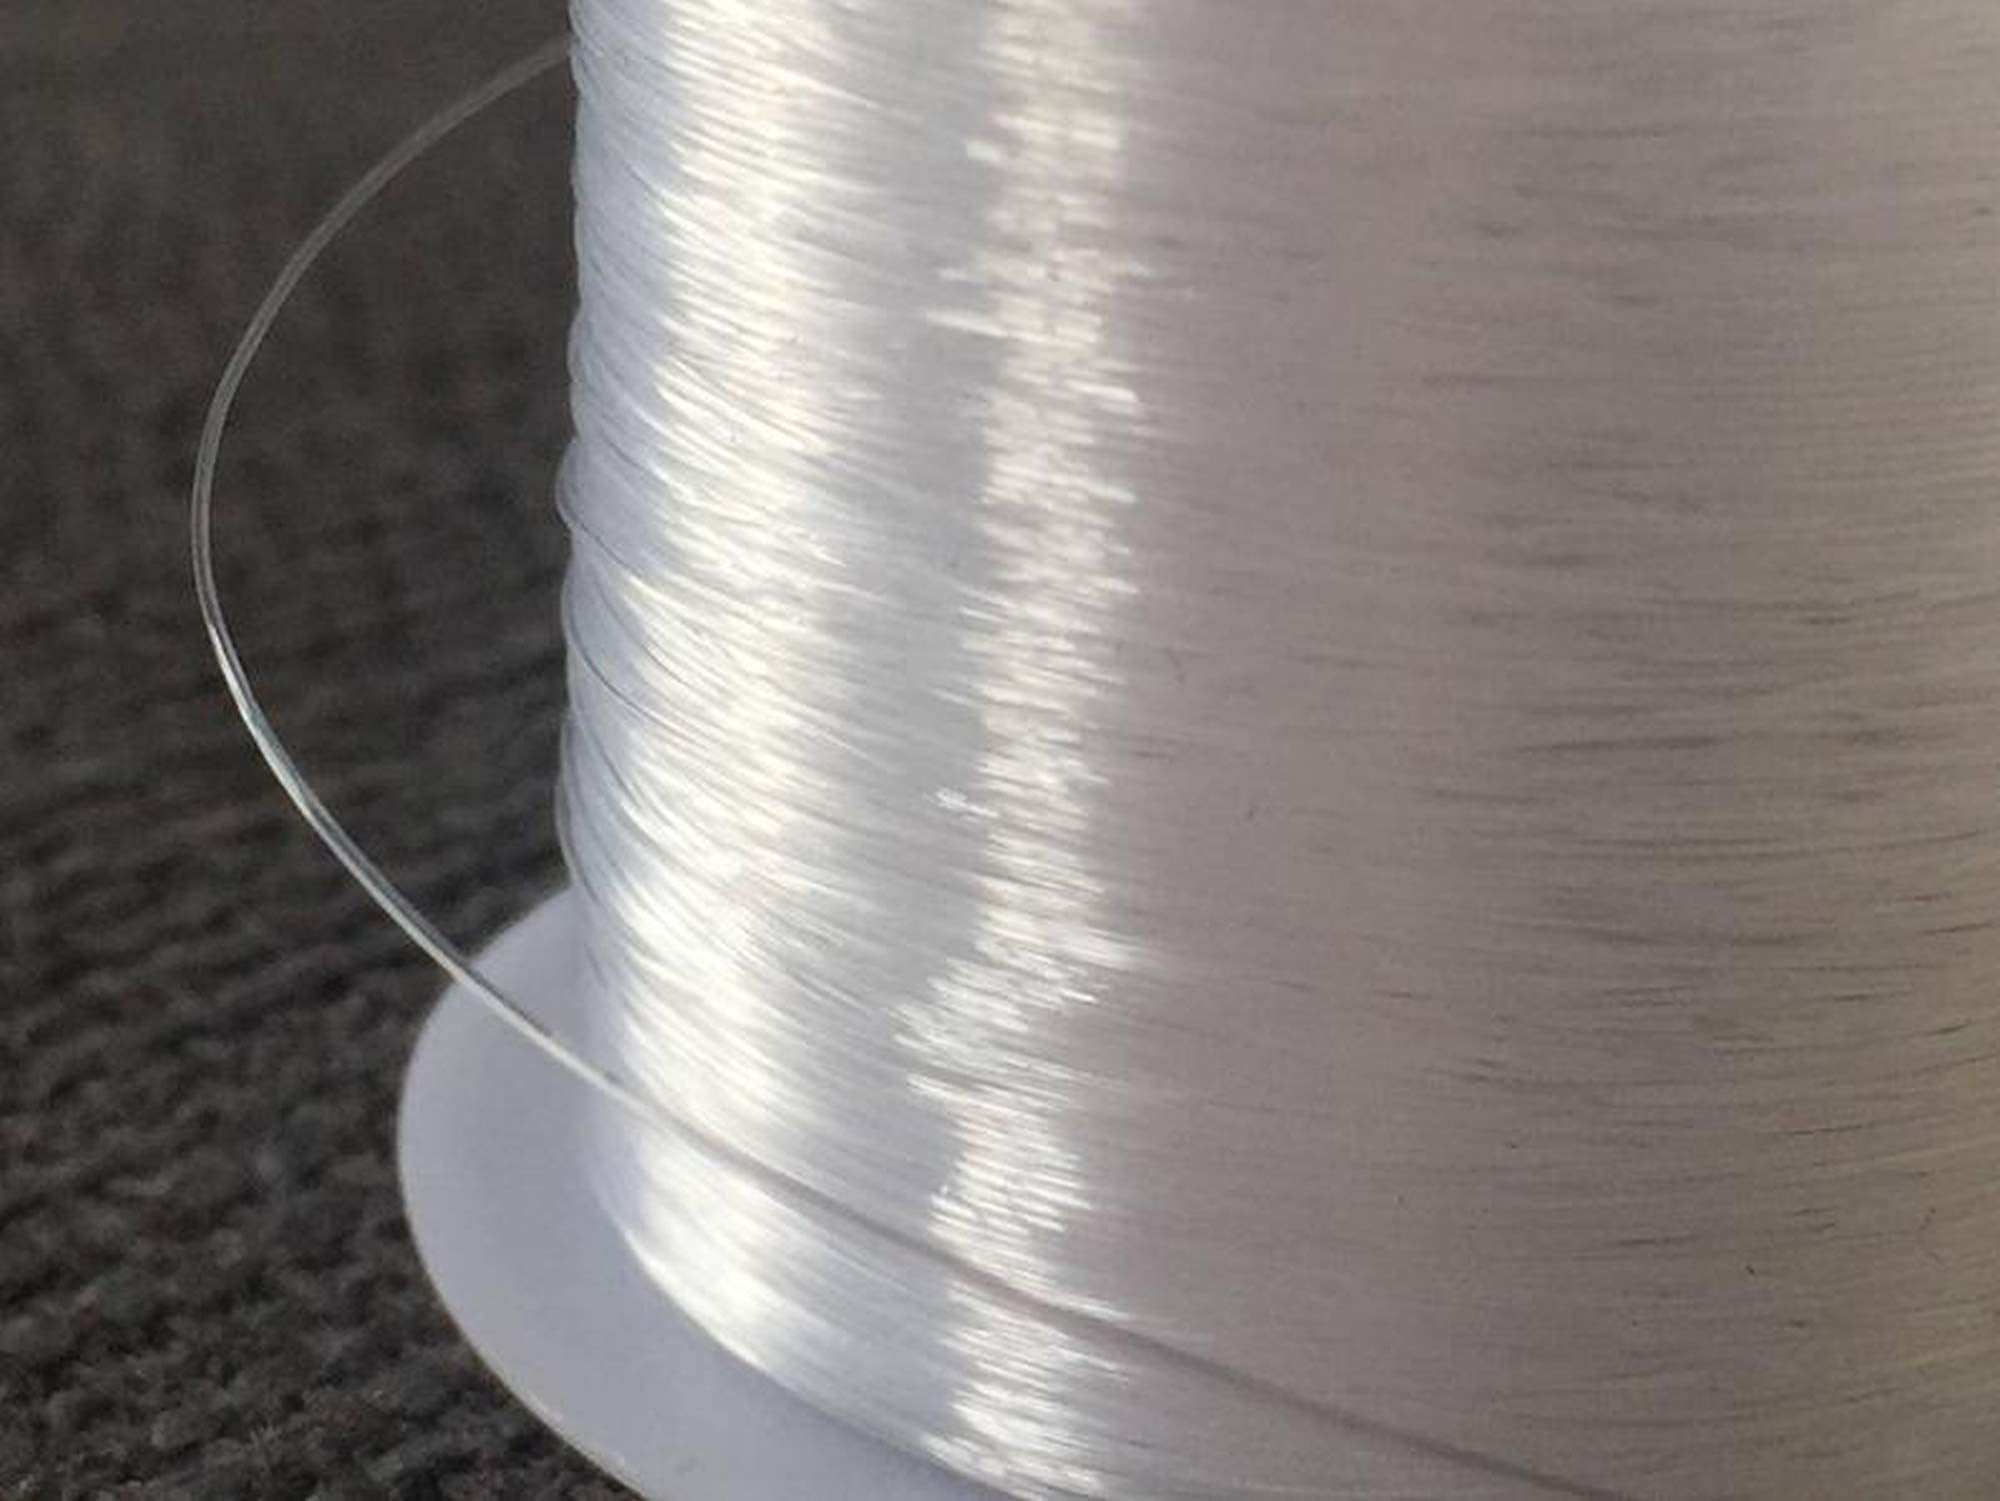 0.15mm Clear Nylon Thread Invisible String Non Stretch Clear Fishing Wire Transparent Plastic Sewing Thread For Hanging Decorations Craft Party Balloon Arch Beading & Jewellery Making - Approx Tensile Strength 0.9kg (0.15mm x 100m - 5 Spools)